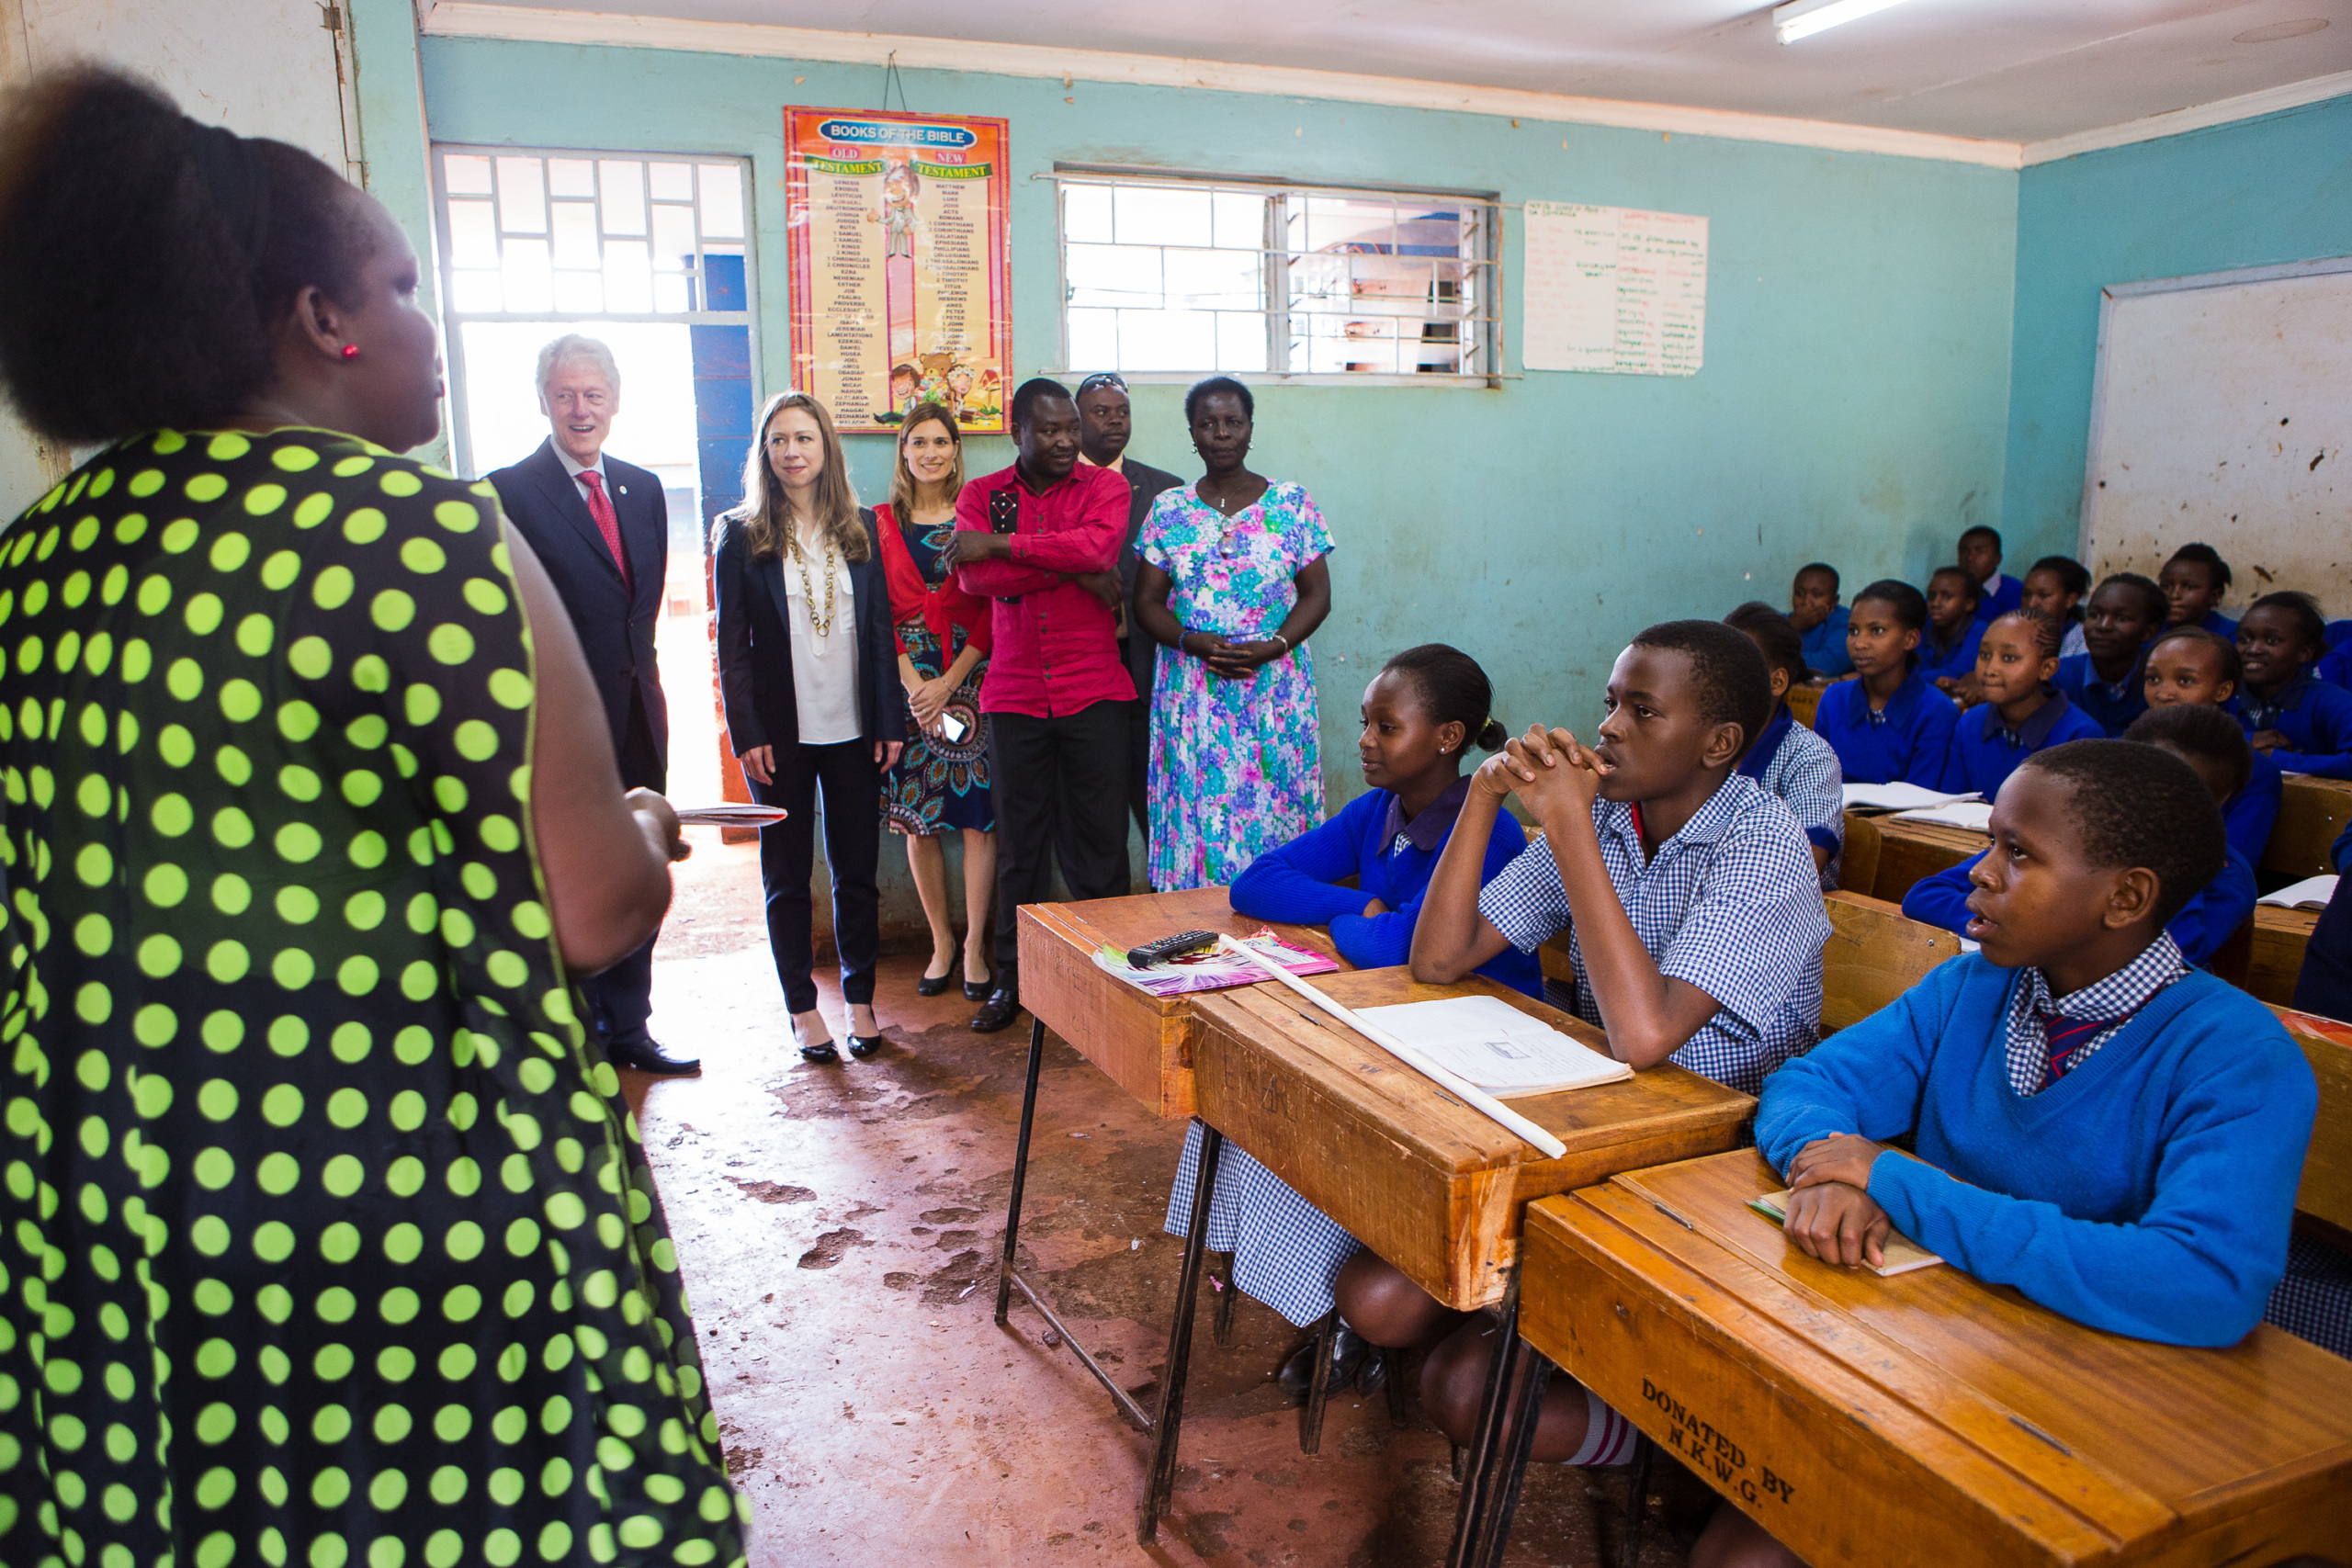 Africa 2015 No Ceilings event at Farasi Lane School Photo by Max W. Orenstein / Clinton Foundation